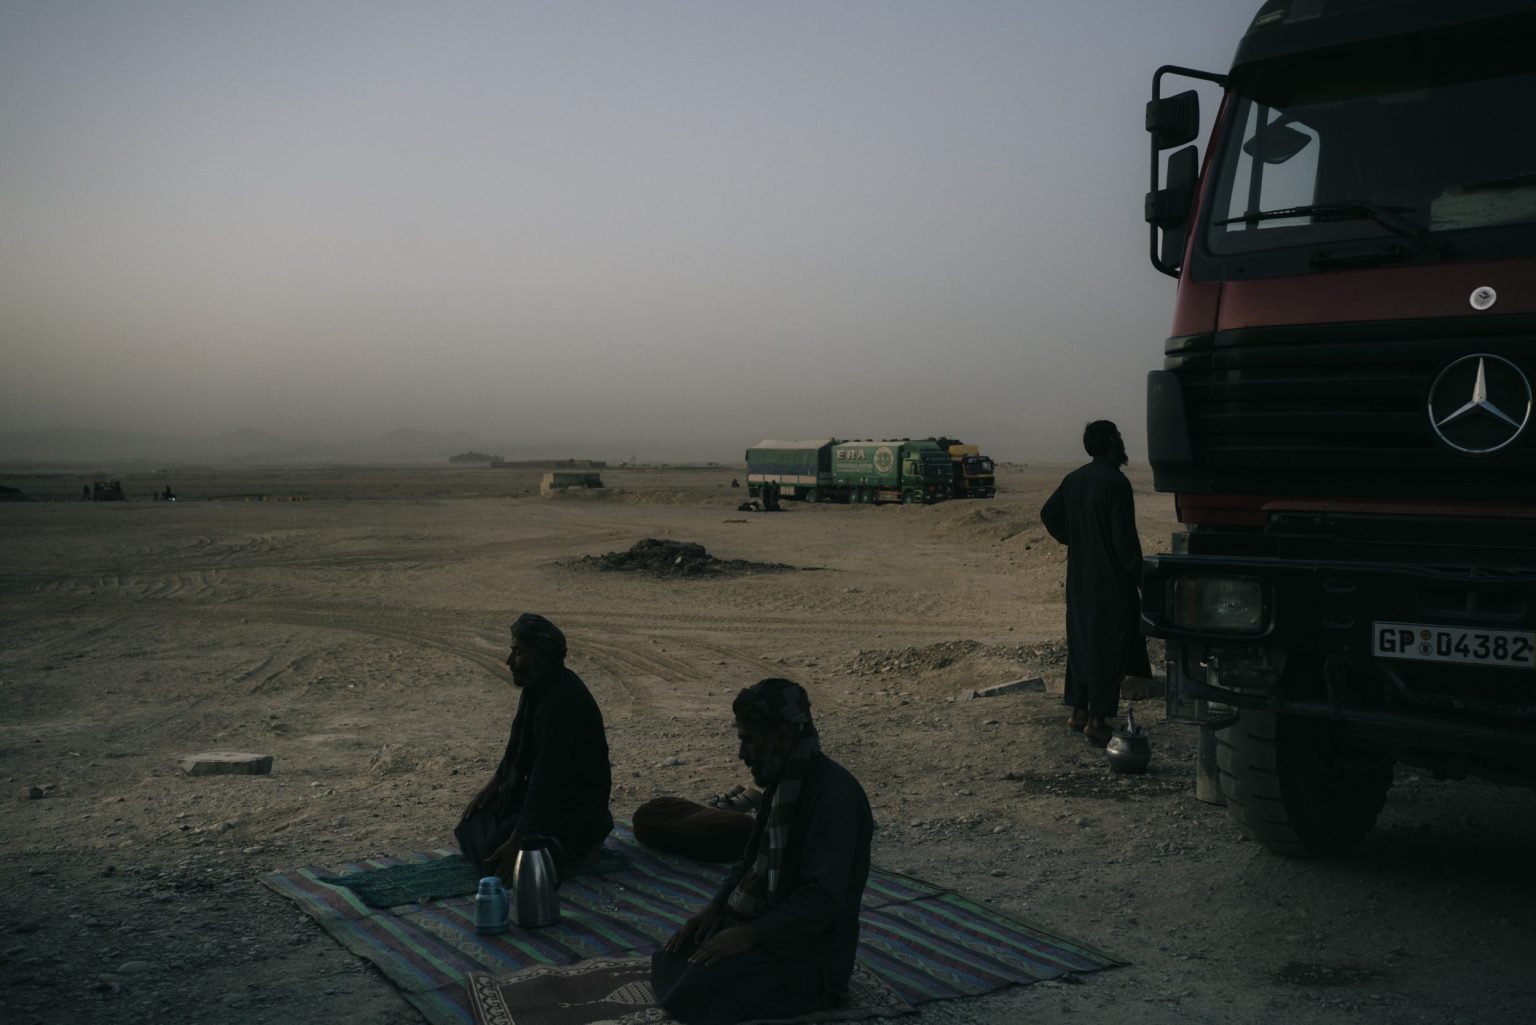 ZABUL, AFGHANISTAN - OCTOBER 19:
Truck drivers pray in a resting area outside the city of Kandahar in the evening.
(Photo by Lorenzo Tugnoli/ The Washington Post)